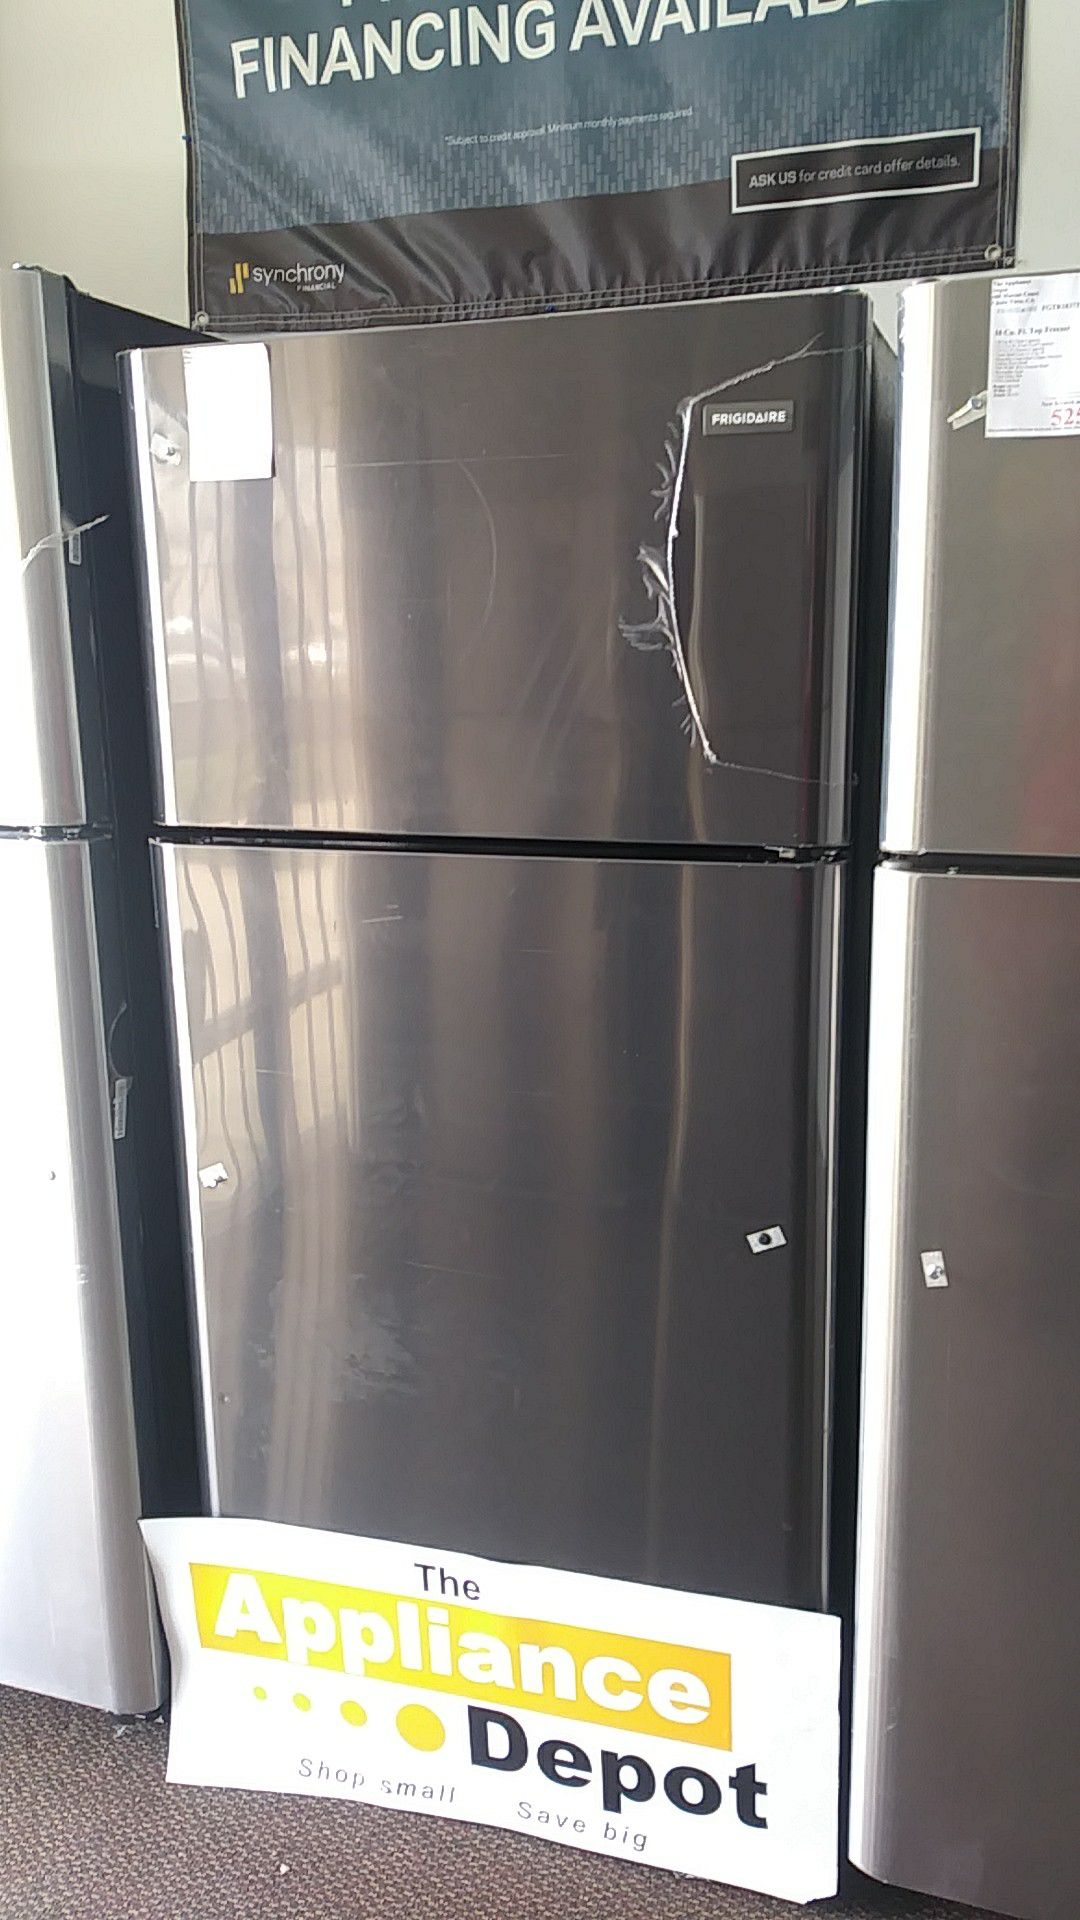 New Frigidaire Top Freezer in black stainless